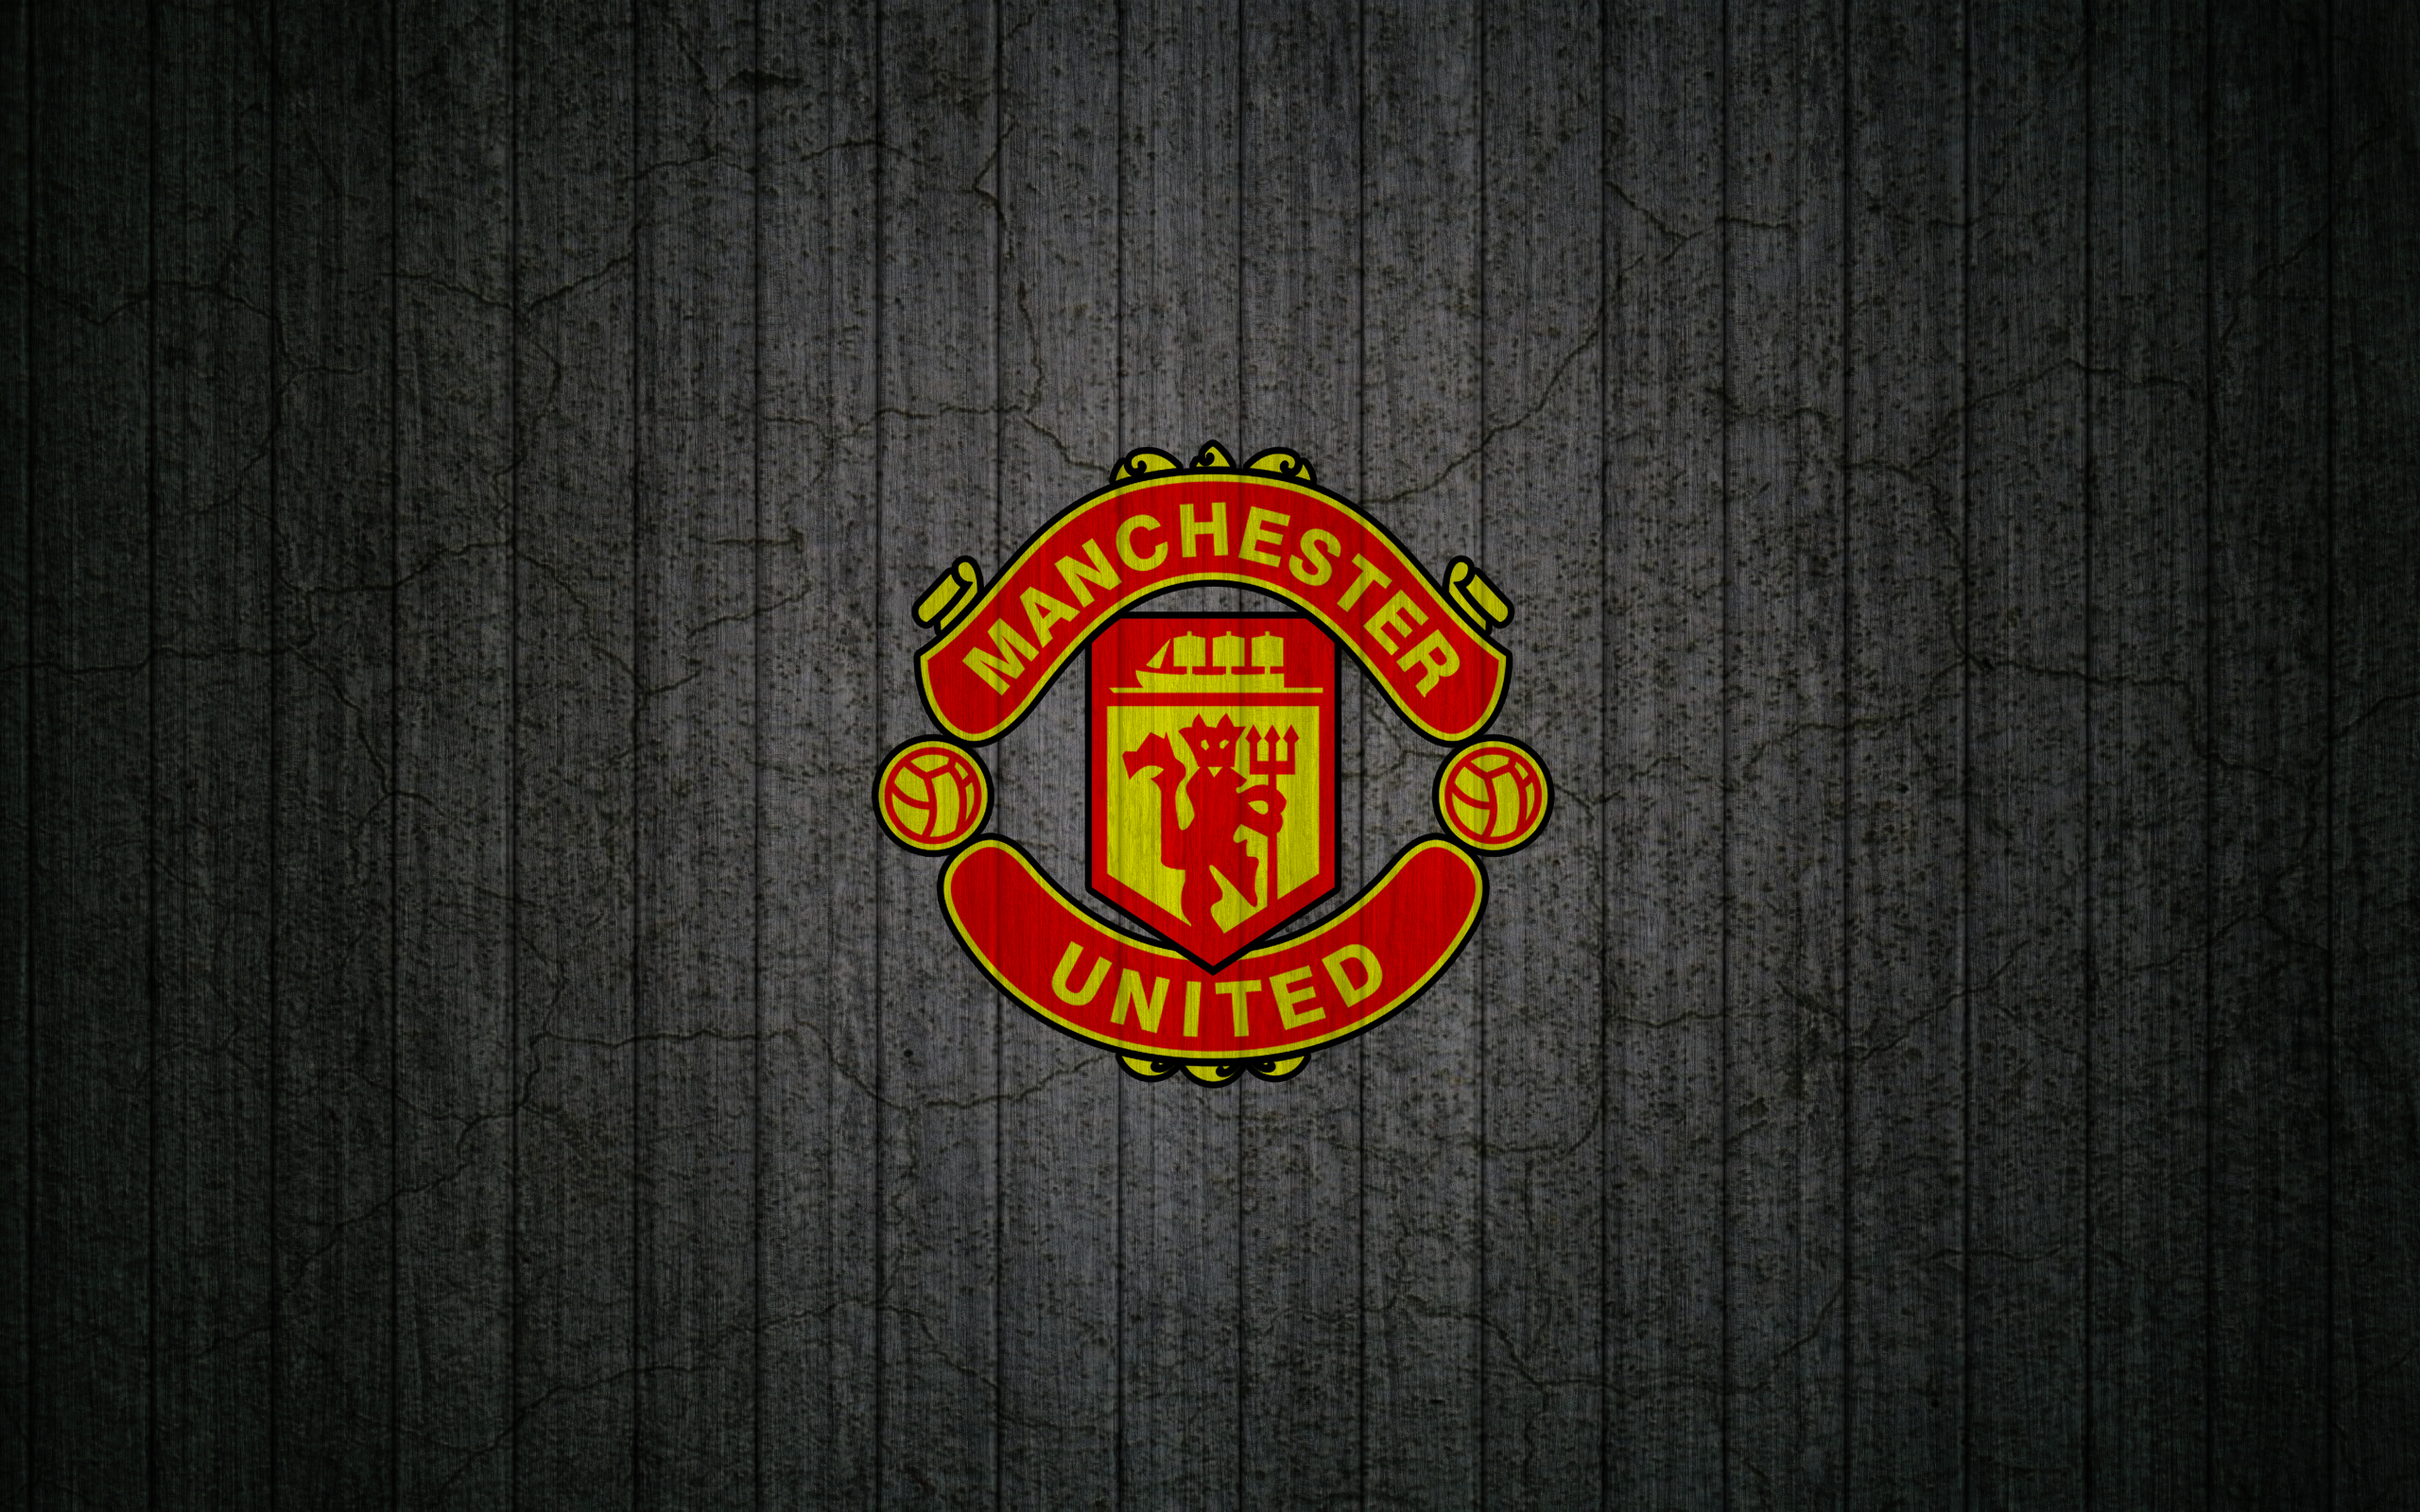 Manchester United wallpaper by sspace7 on DeviantArt